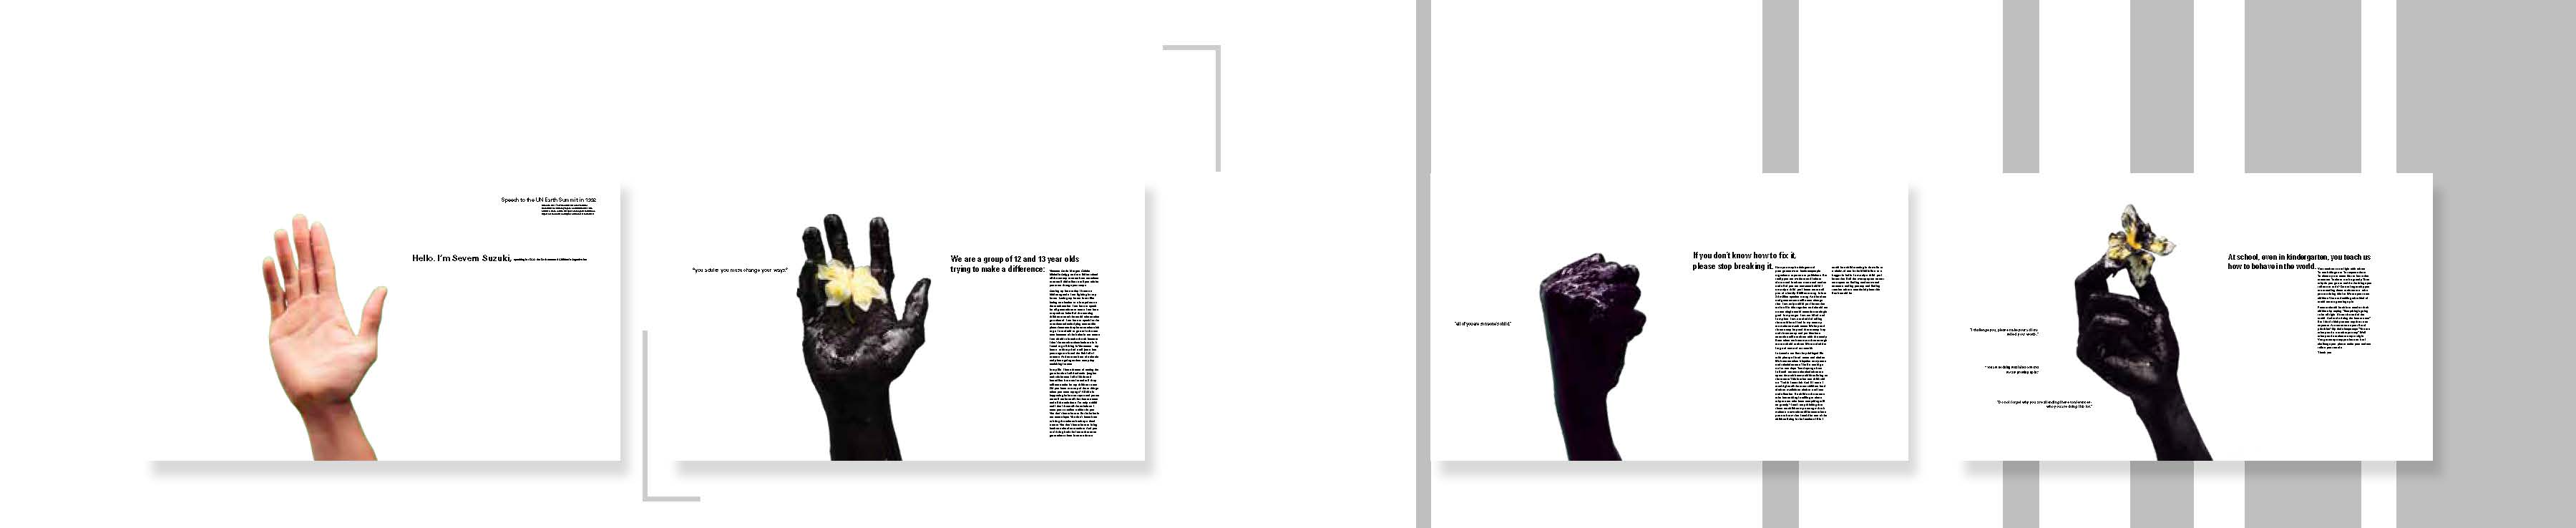 small thumbnail images of magazine spreads with hands and text on each page